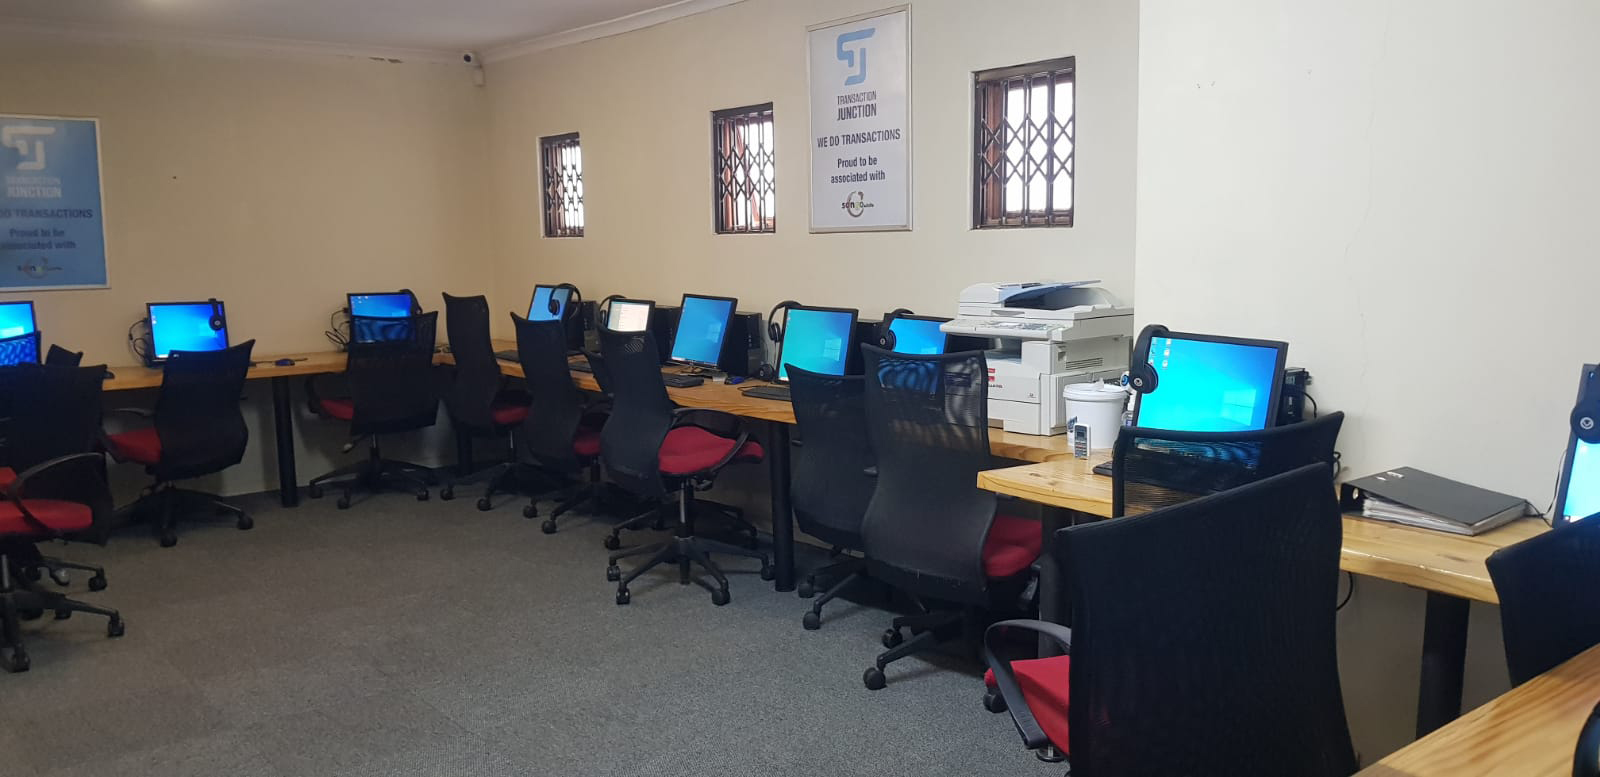 Transaction Junction sets up a new computer lab at Songo 5